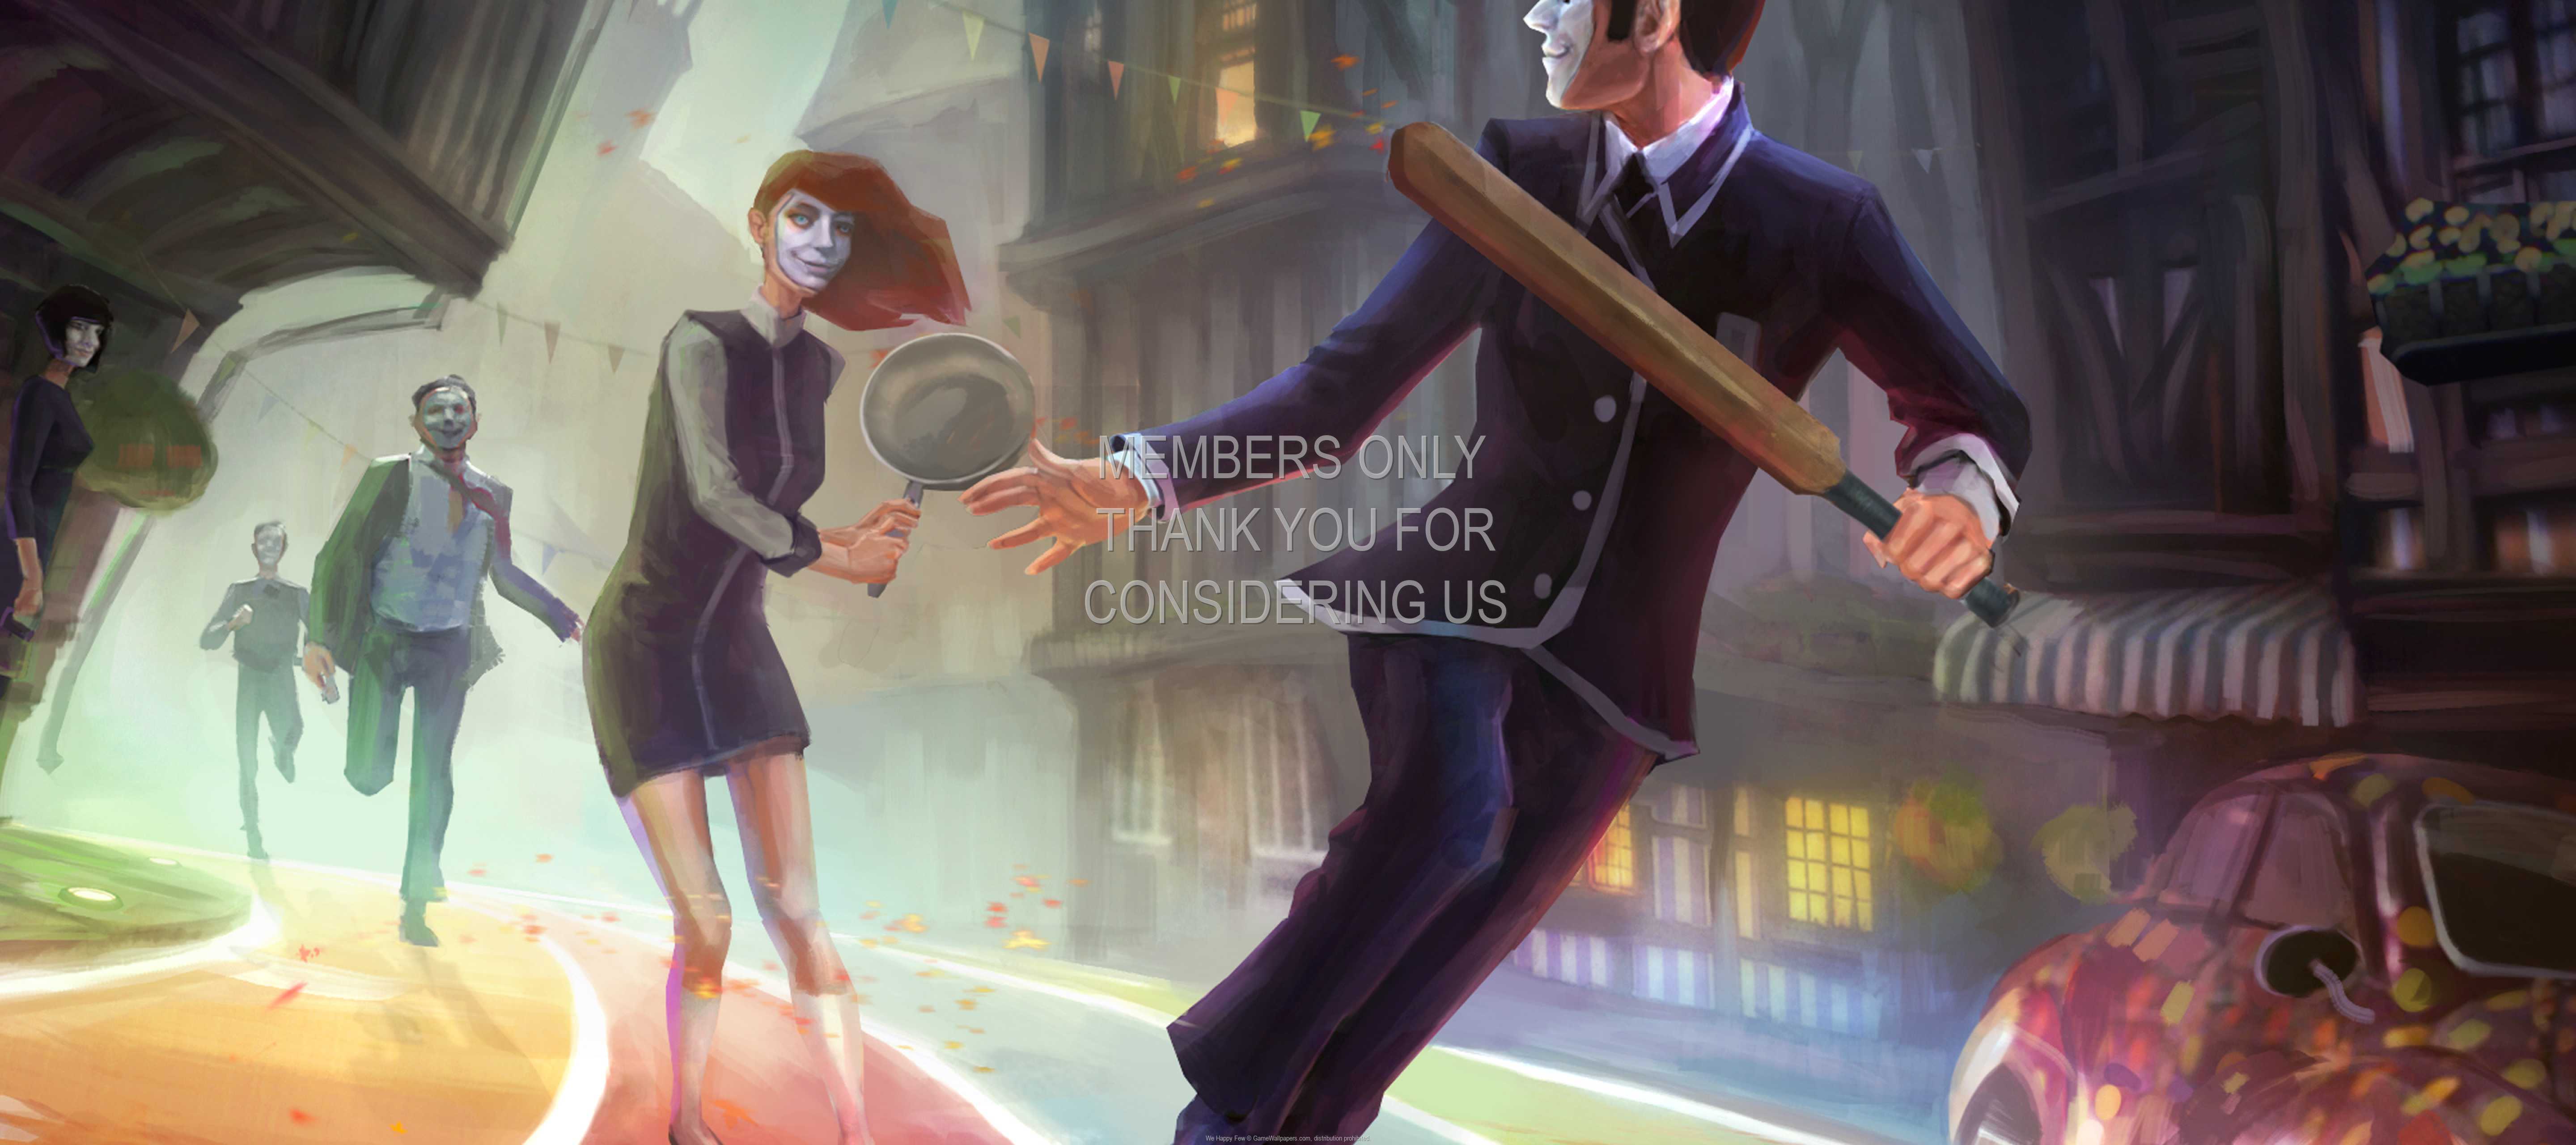 We Happy Few 1440p%20Horizontal Mobile wallpaper or background 02